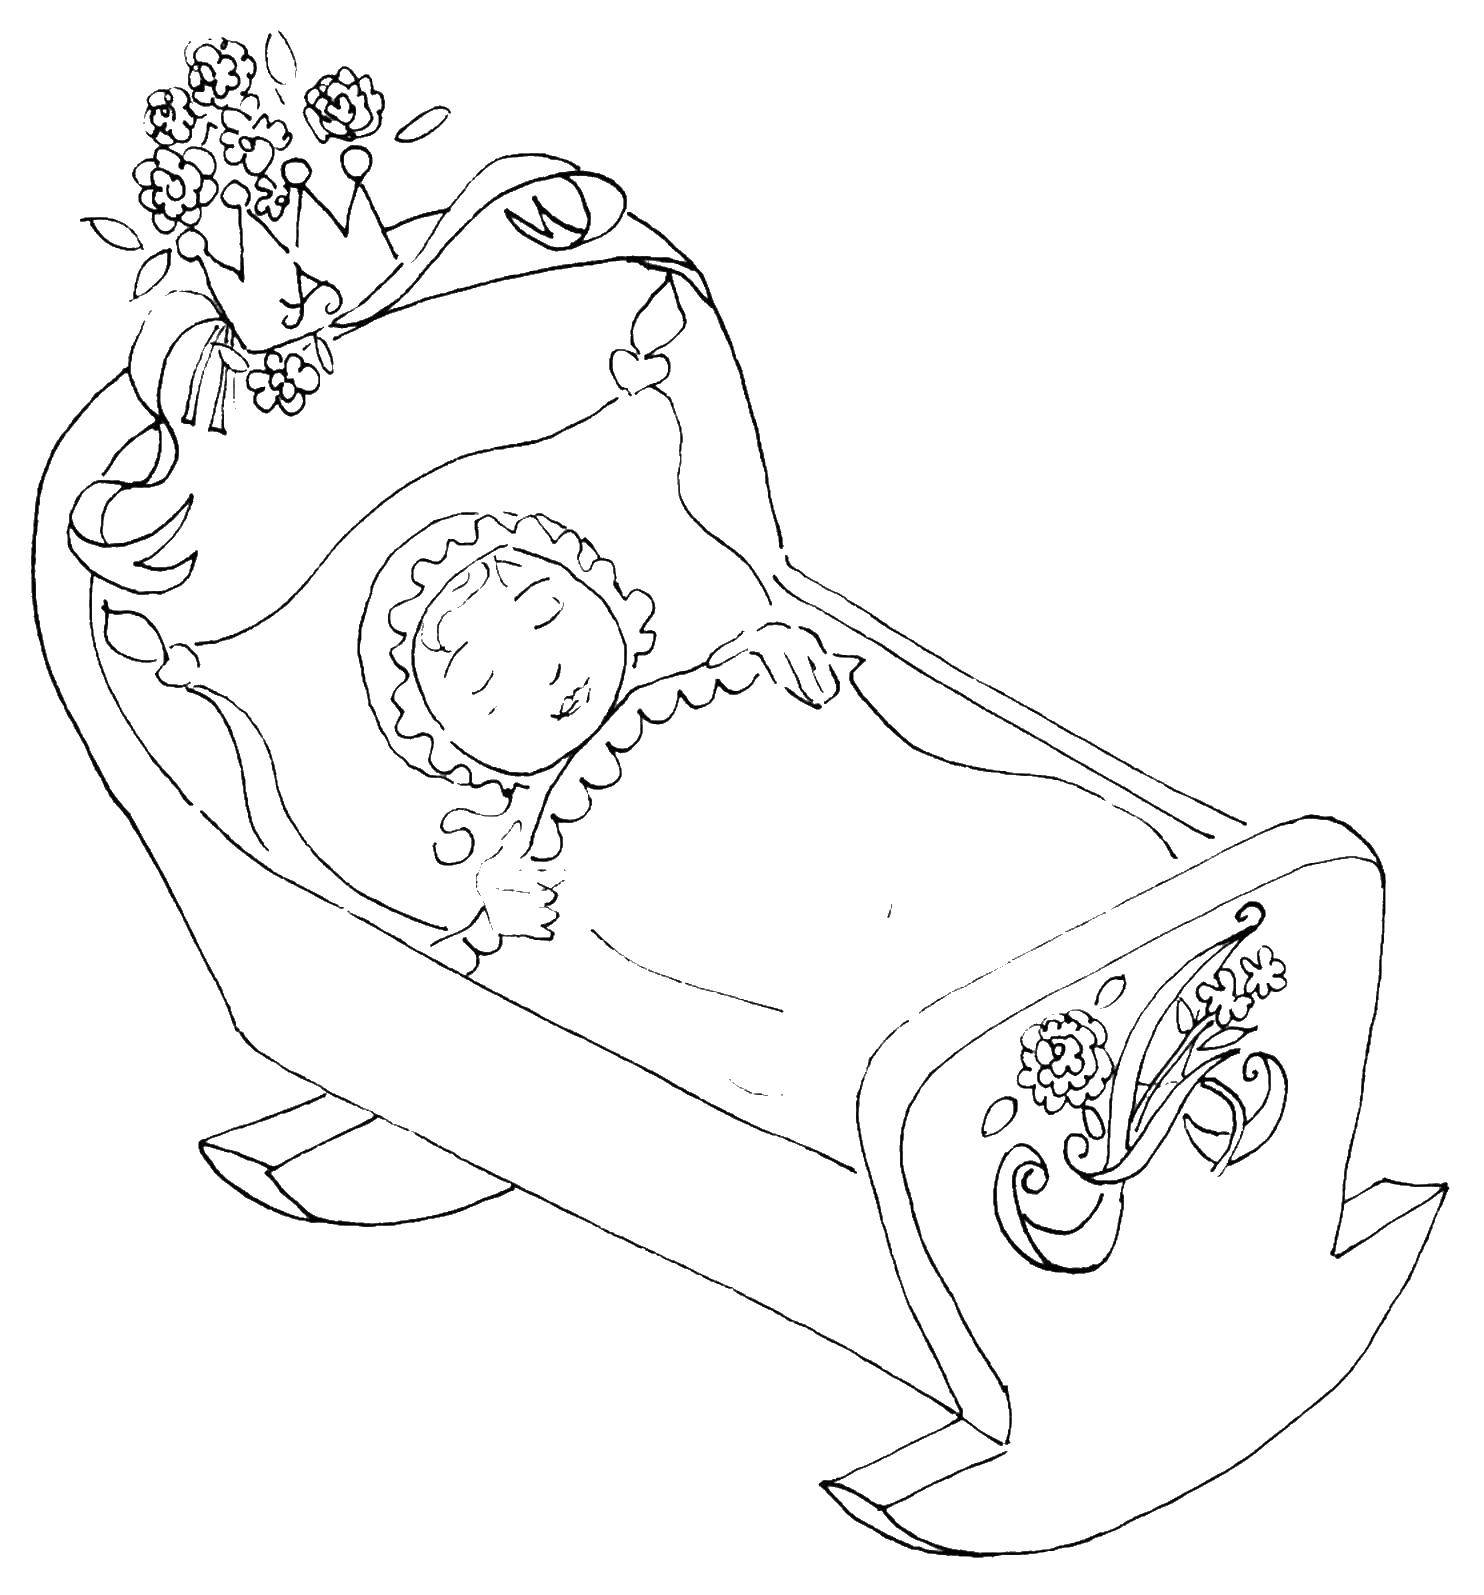 Coloring The baby in the cradle. Category children. Tags:  child, cradle, crown.